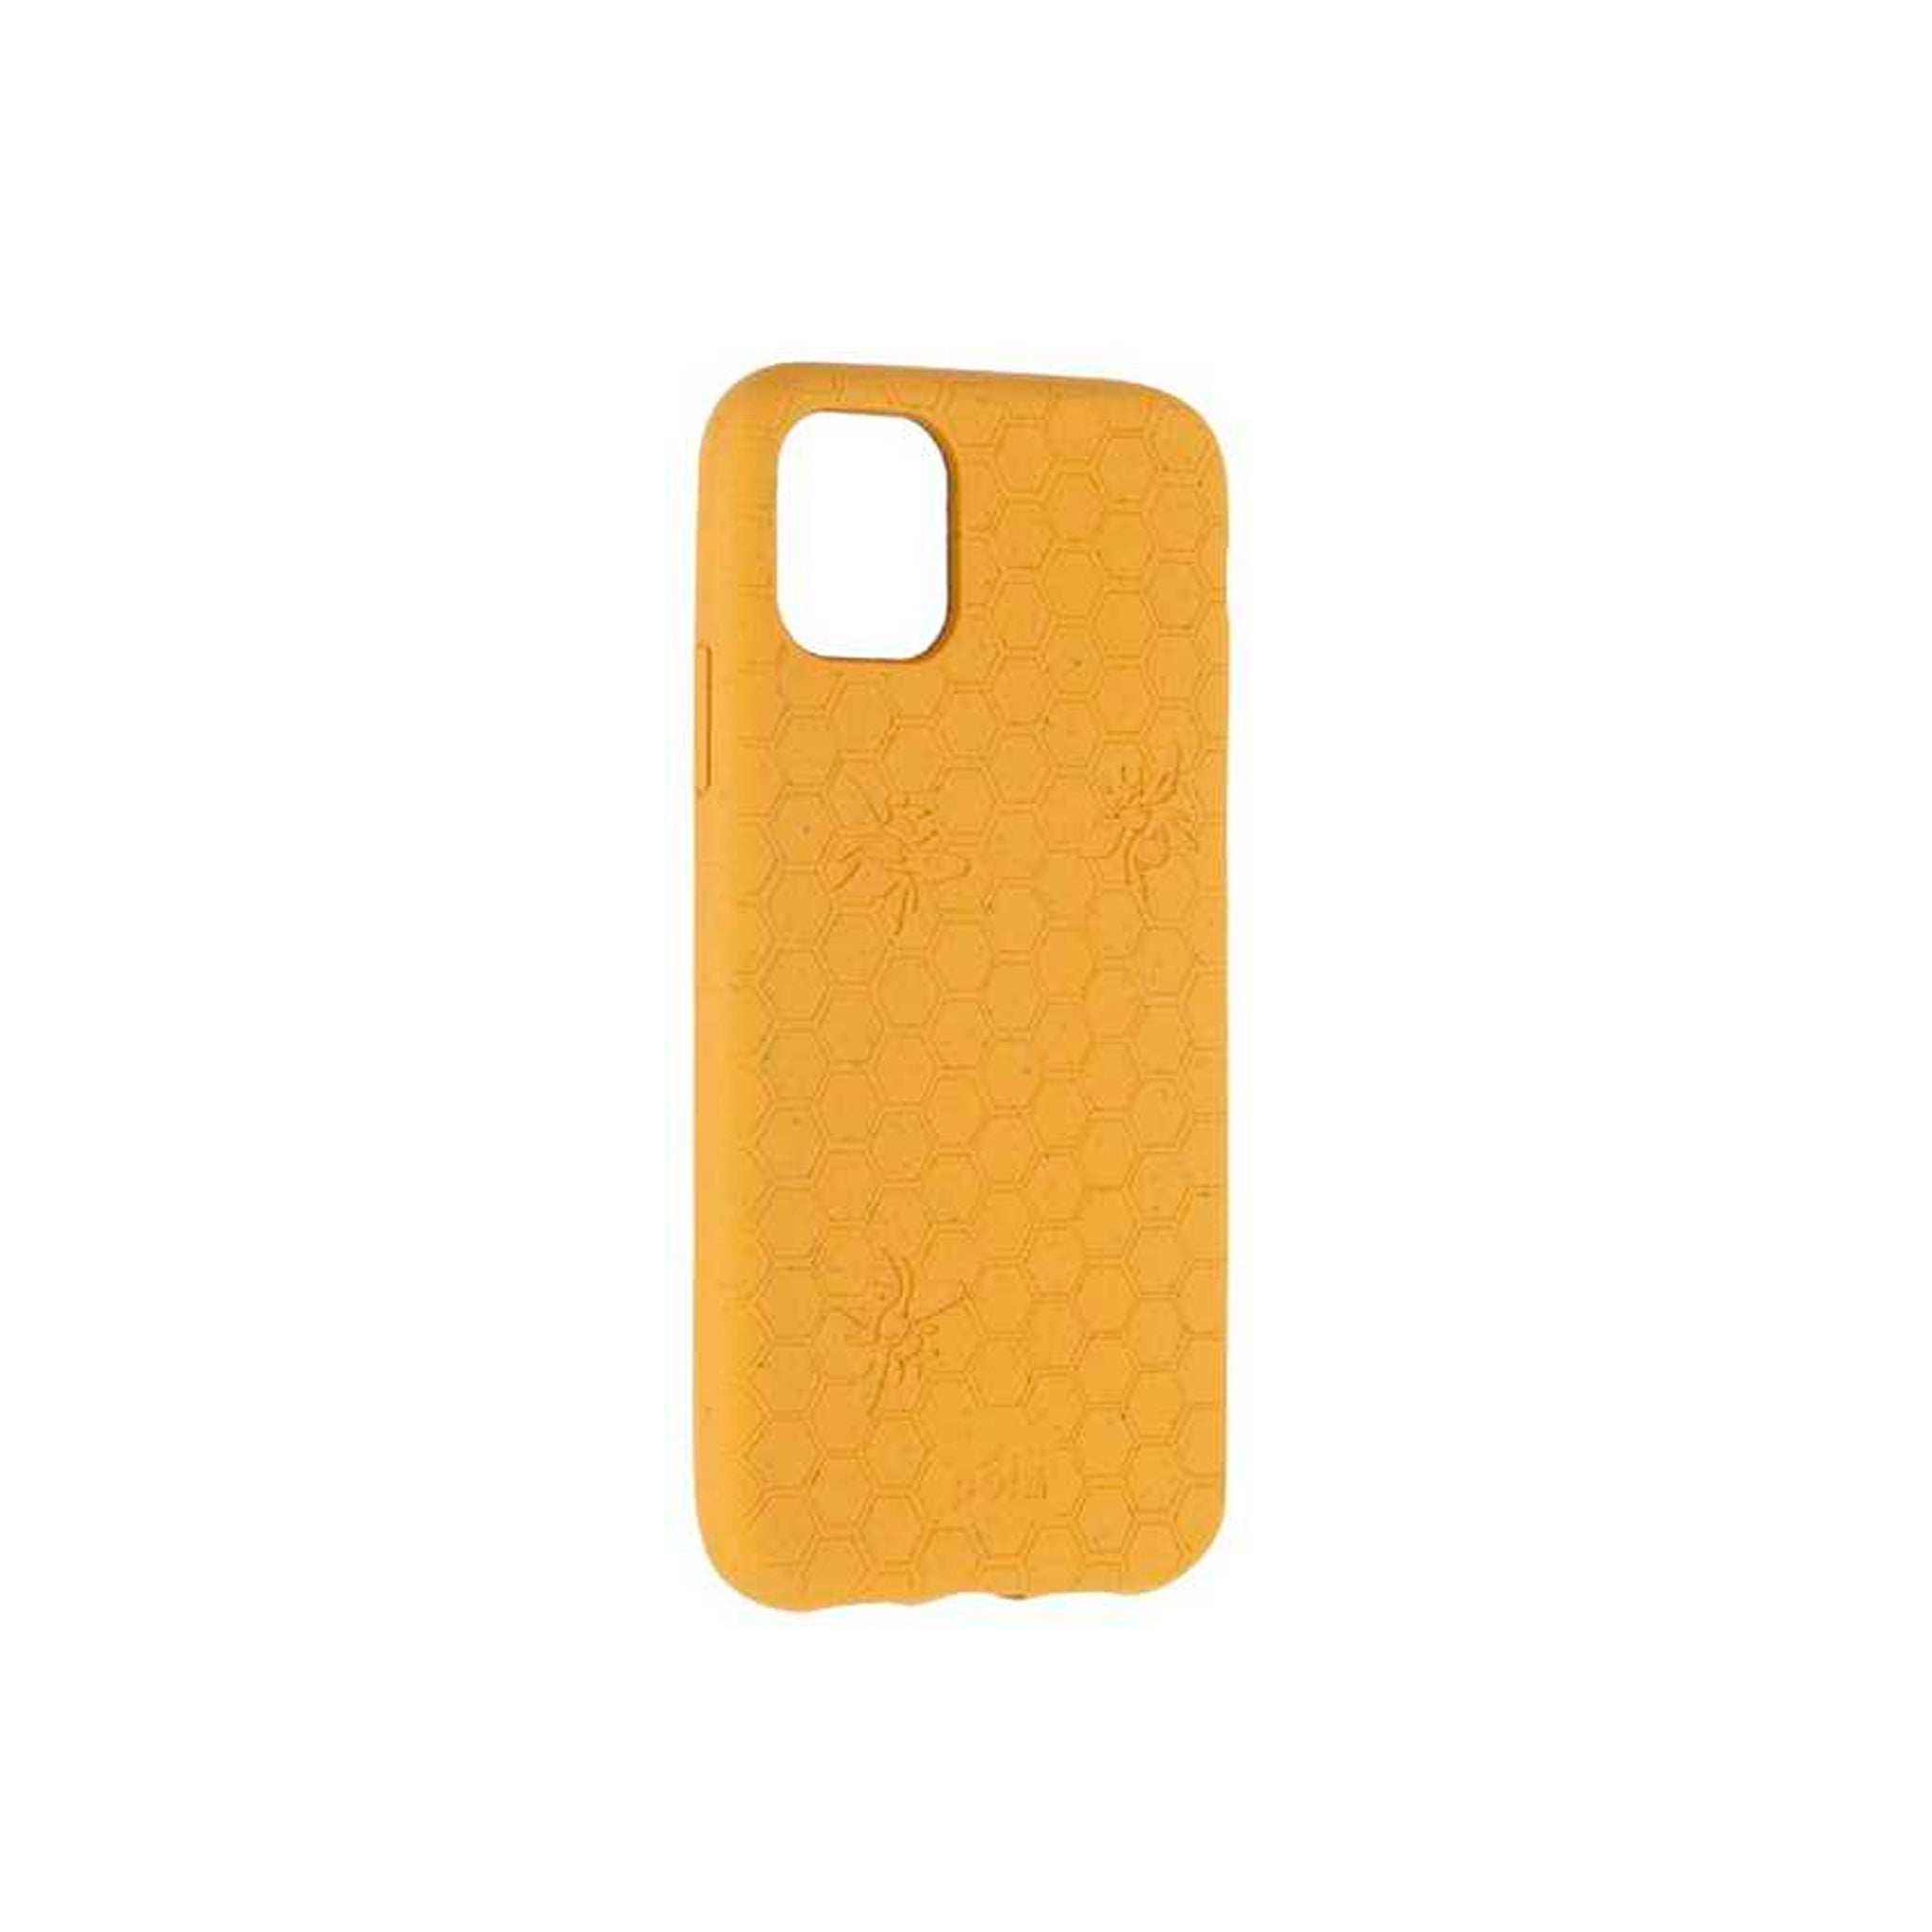 Pela - Eco Friendly Case For Apple Iphone 12 Pro Max - Honey Bee Edition